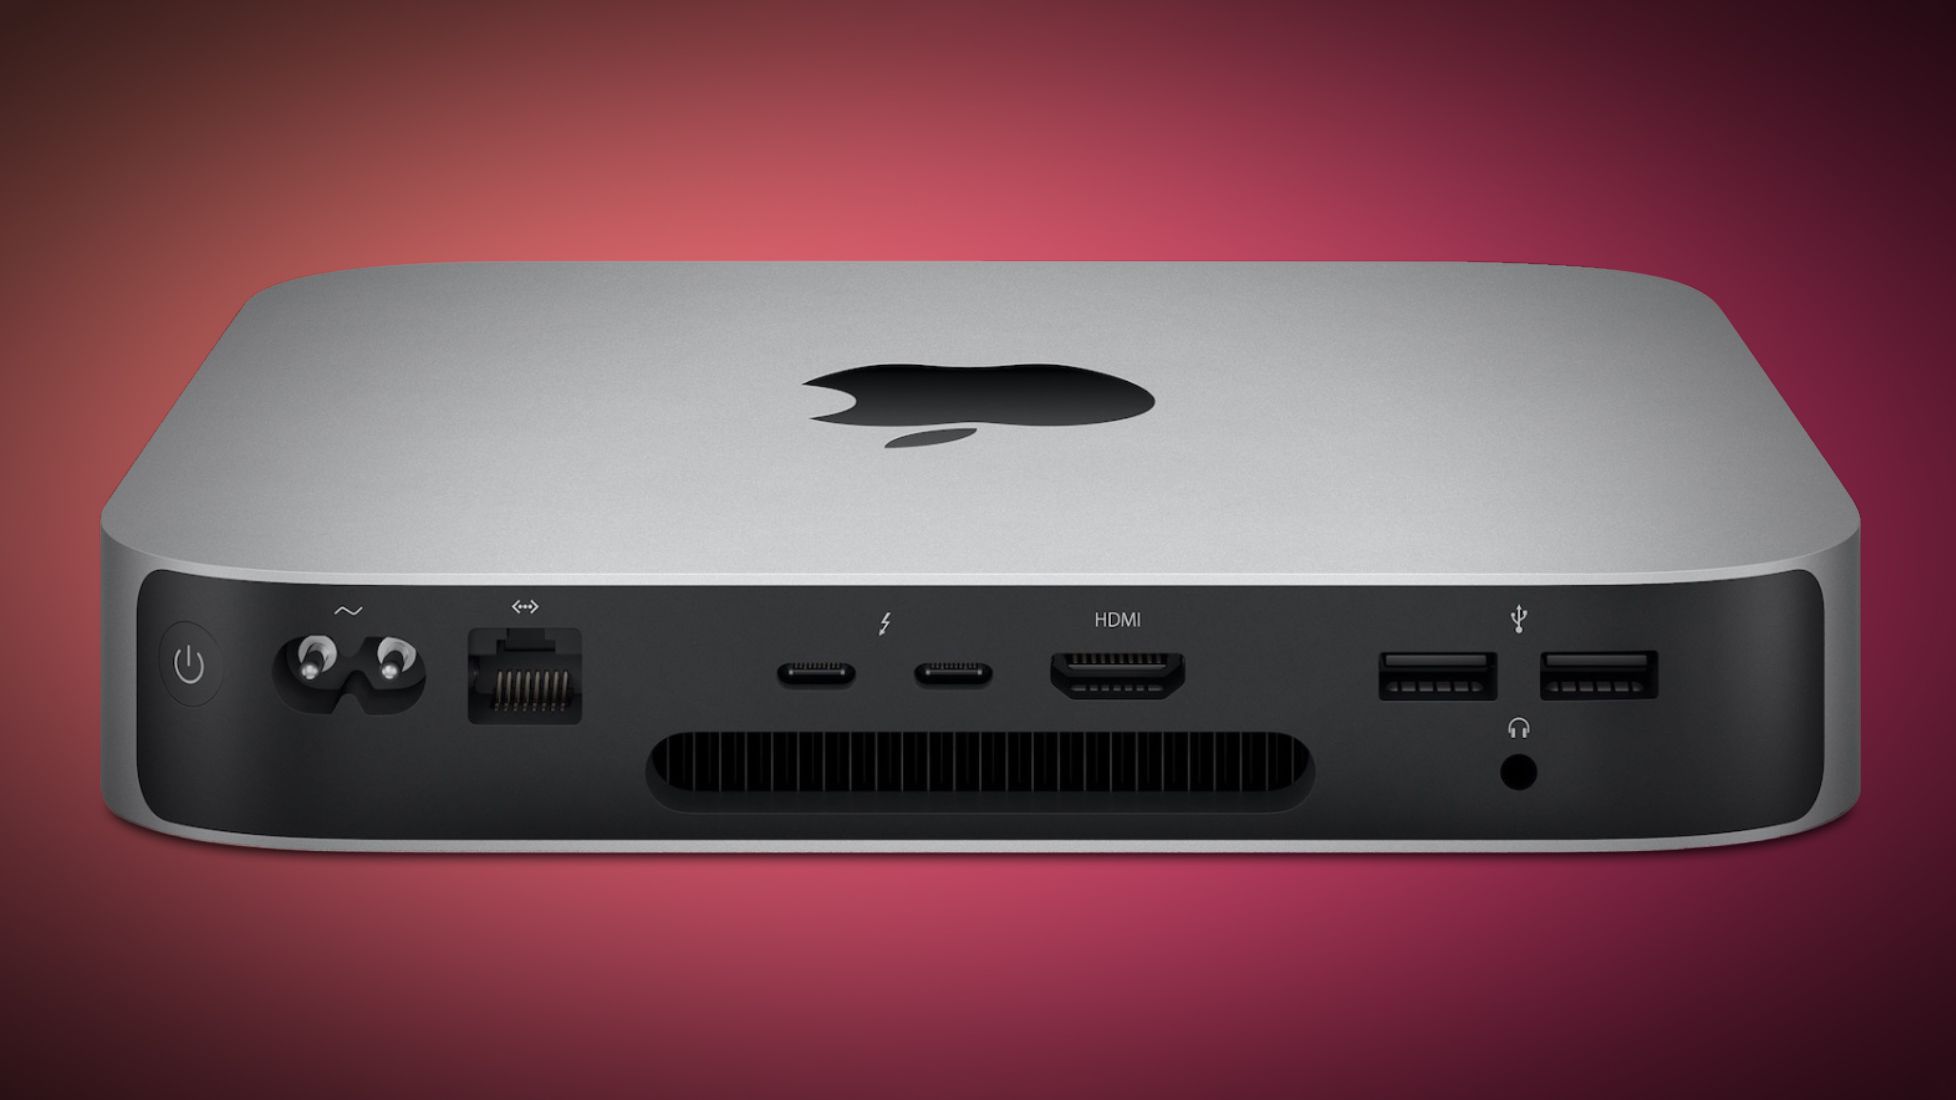 Deals: Get Apple's 512GB M1 Mac Mini for Record Low of $799 on Amazon ($100 Off)